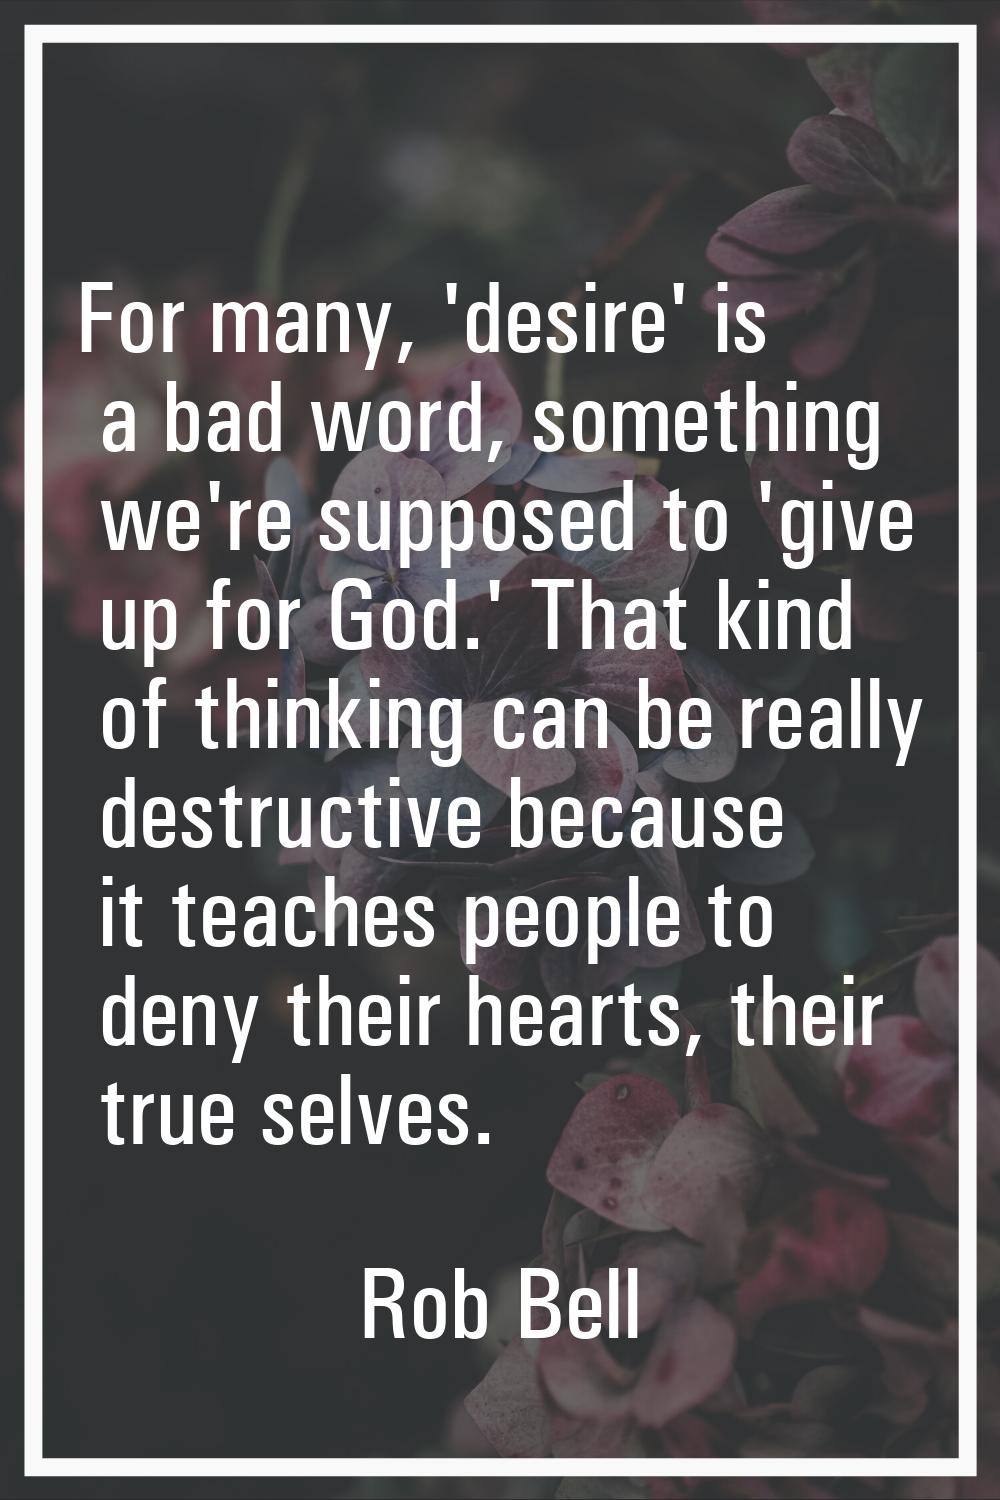 For many, 'desire' is a bad word, something we're supposed to 'give up for God.' That kind of think